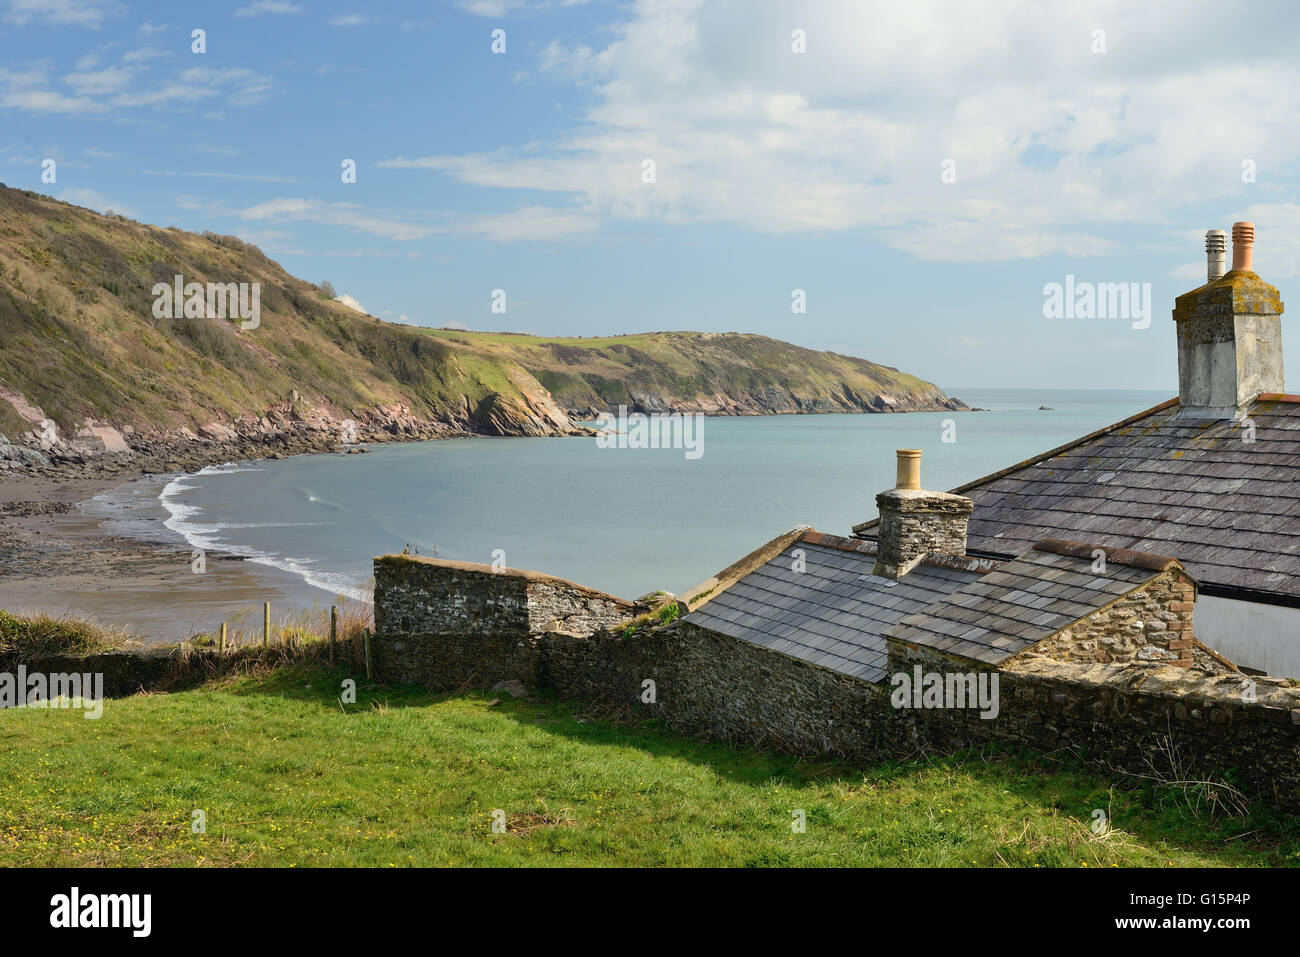 Former coastguard cottages at Man Sands, a secluded bay on the South Devon coast. Stock Photo